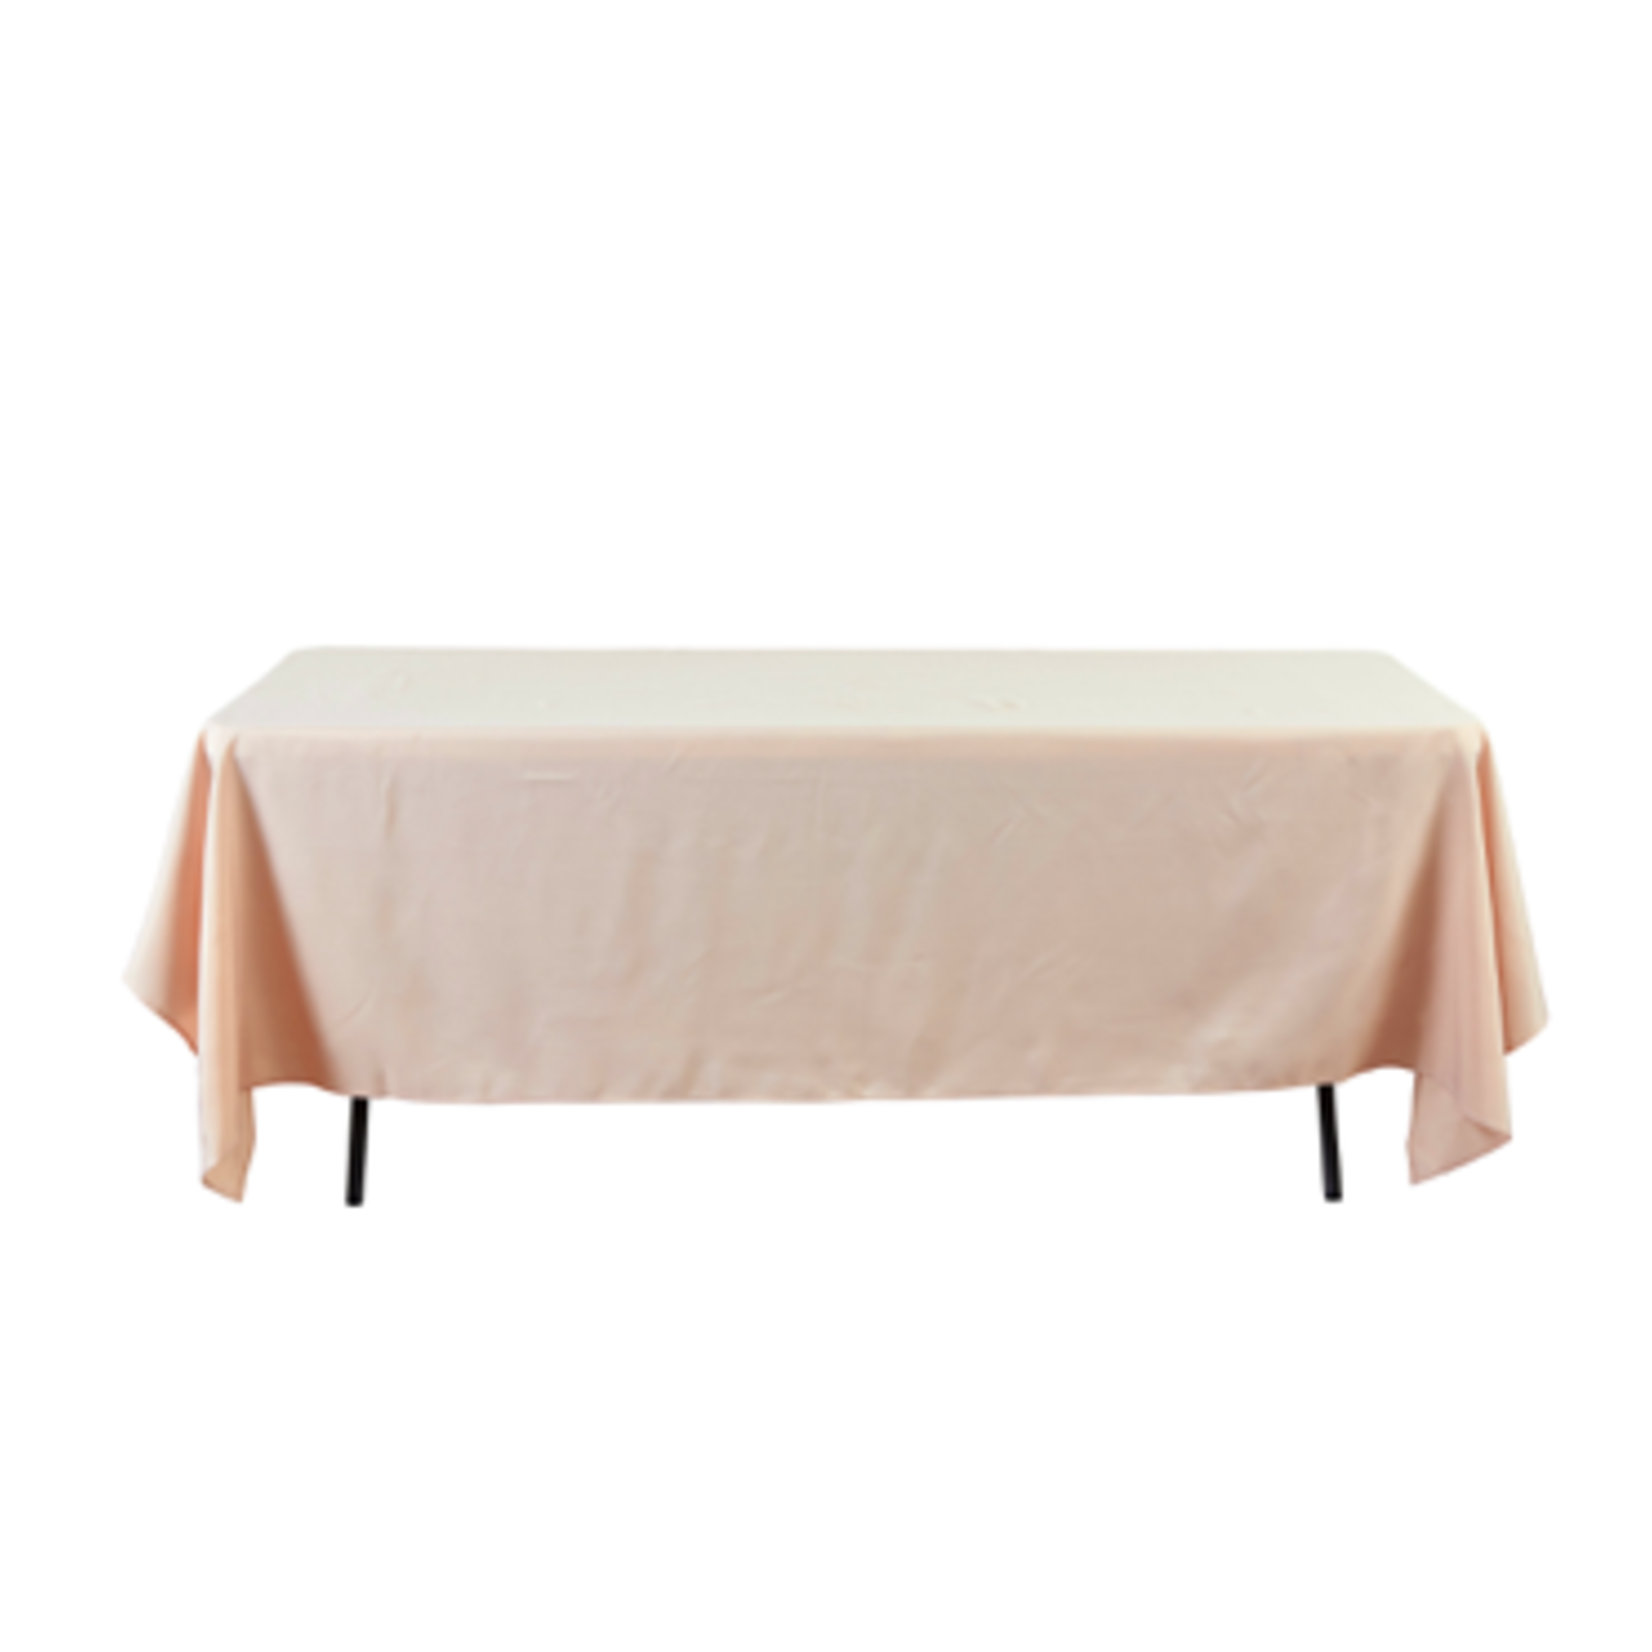 60" X 126" CHAMPAGNE RECTANGULAR POLYESTER TABLE COVER '38-0025CH